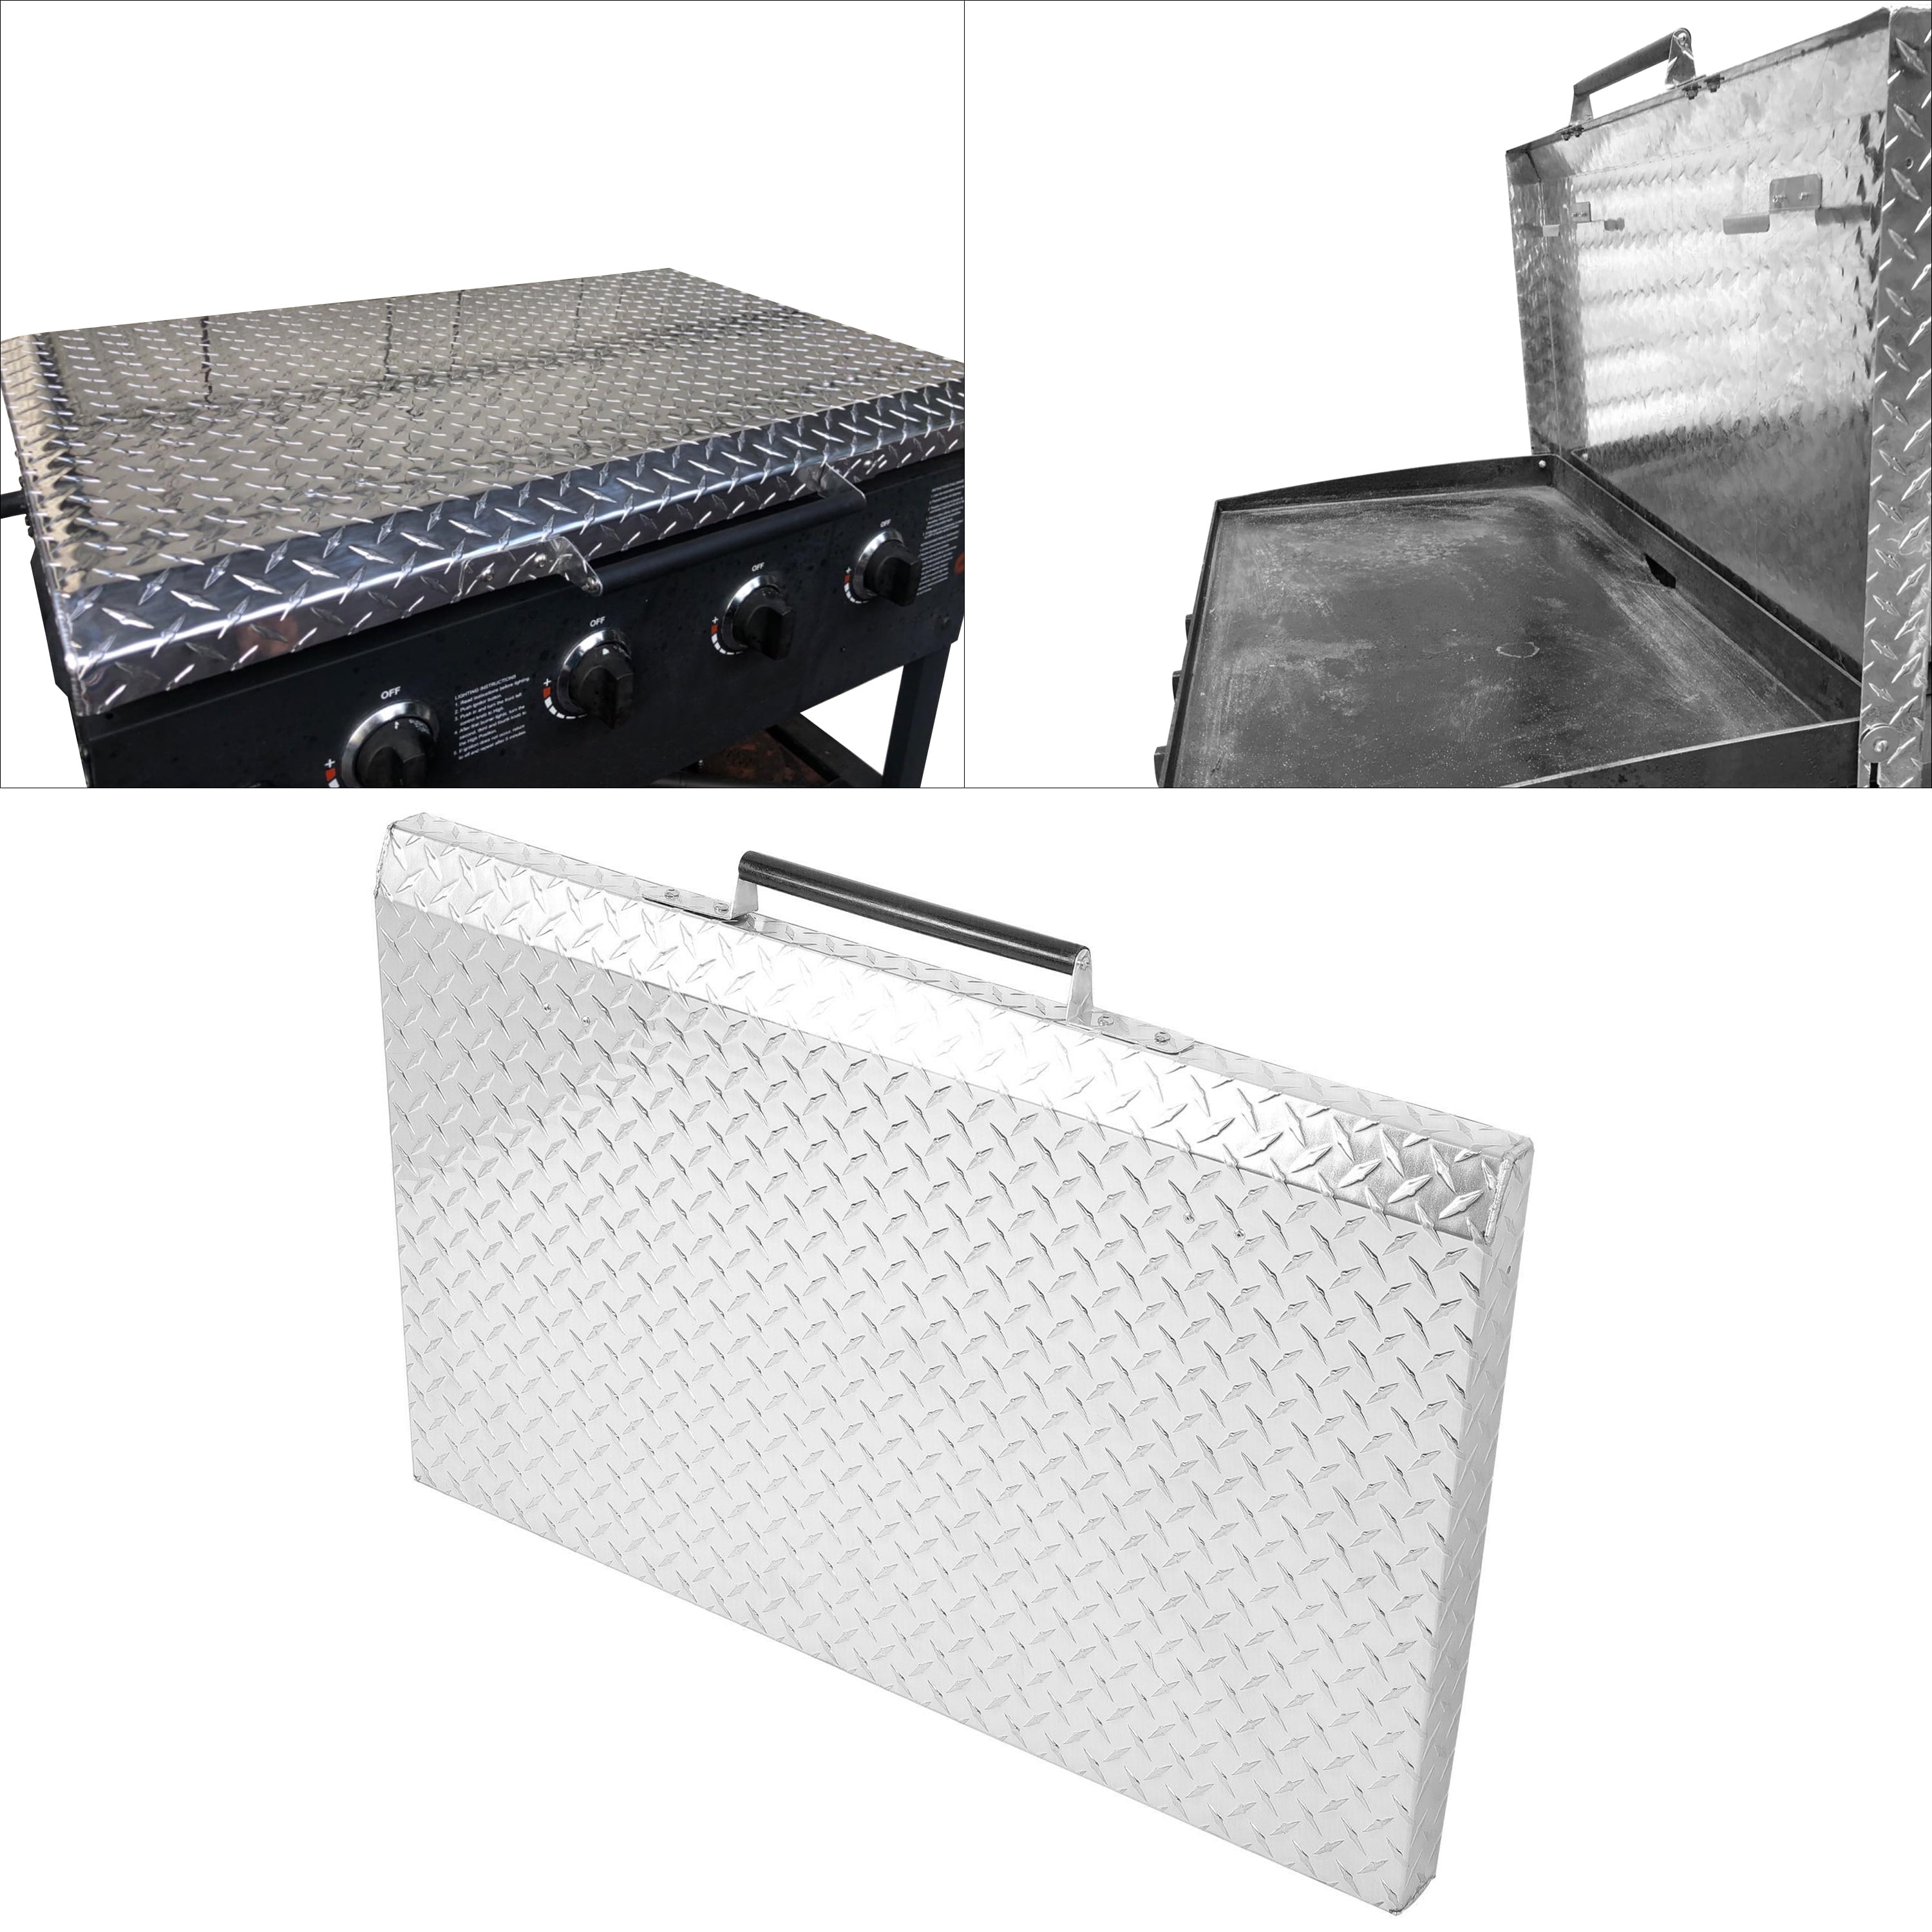 Diamond Plate Aluminum Lid Storage Cover fit 36" Blackstone Griddle Made in USA 